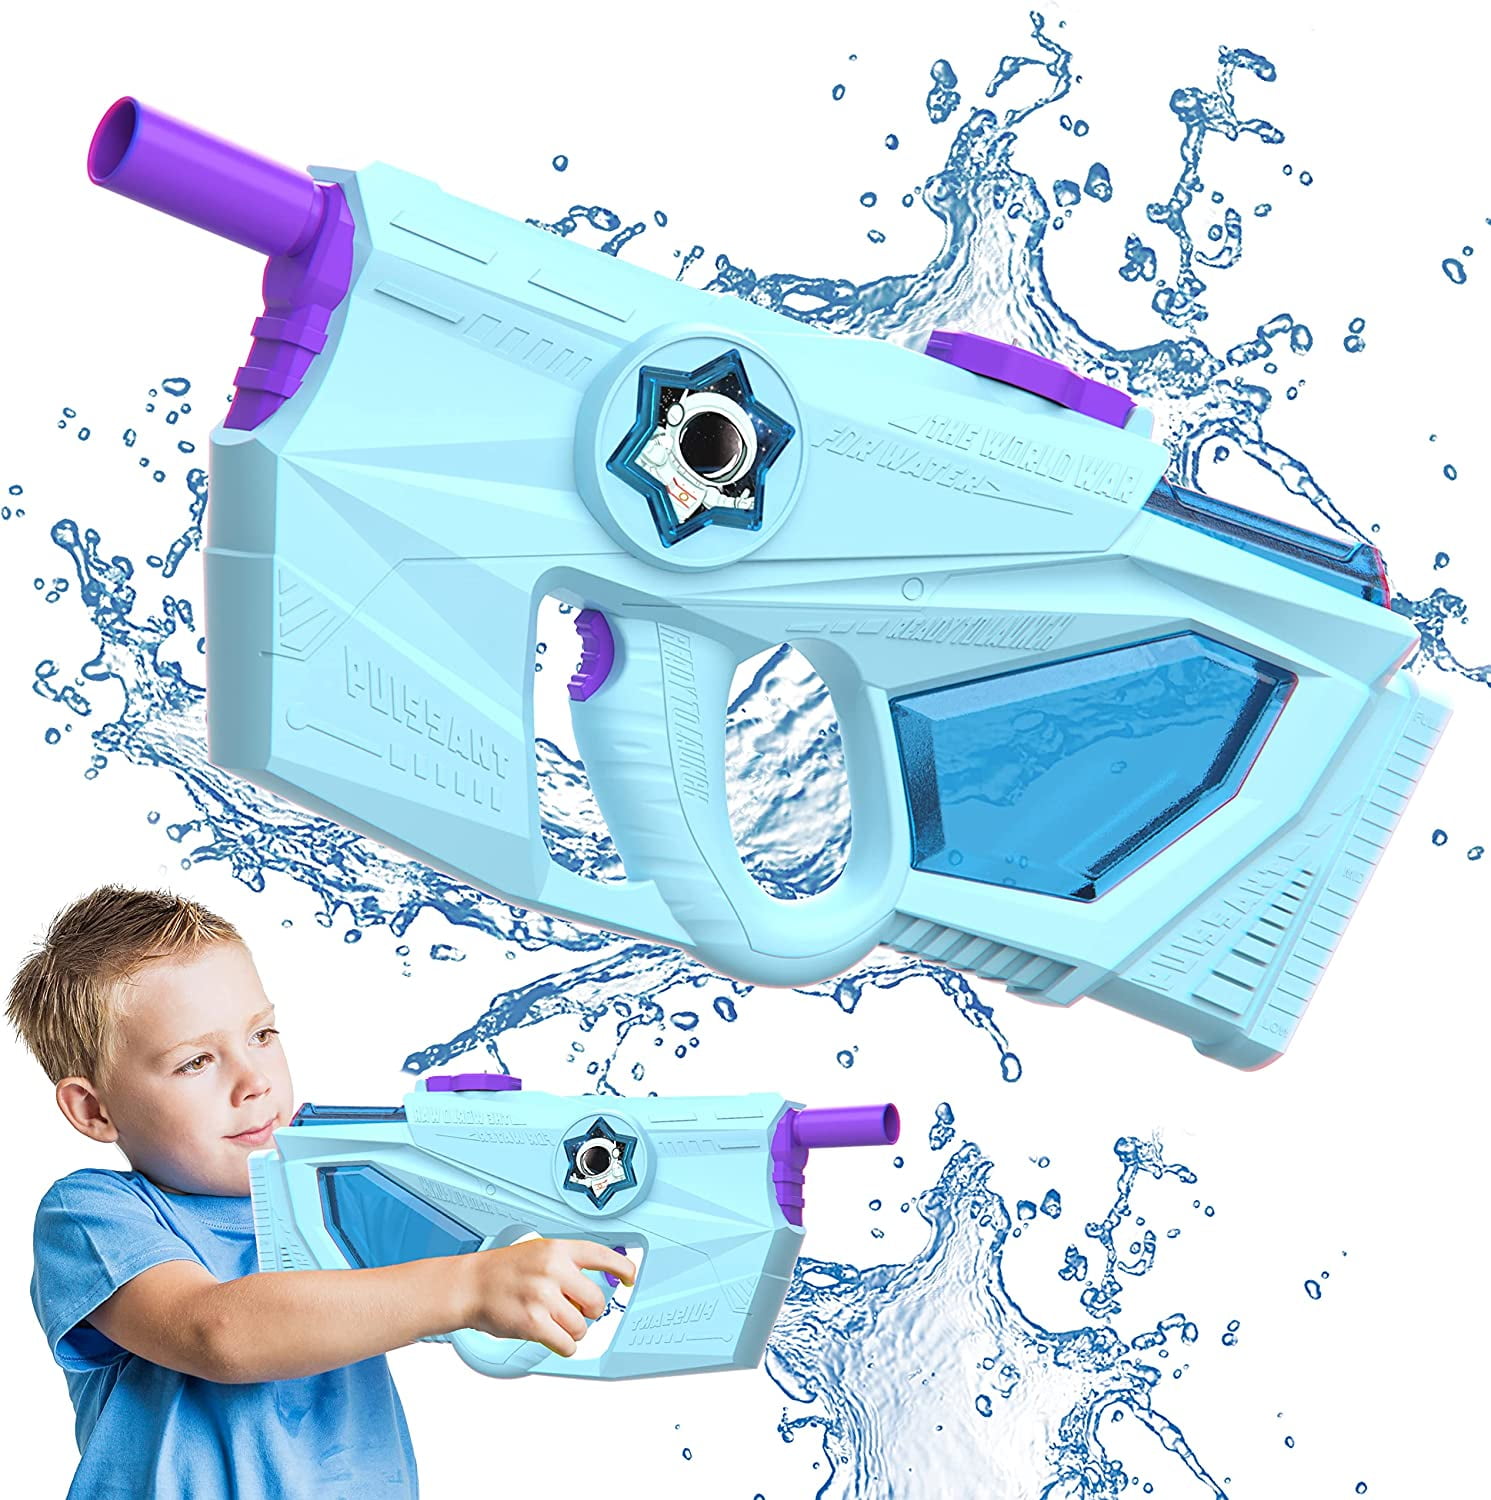 Electric Water Guns - One-Button Automatic Super, Automatic Squirt